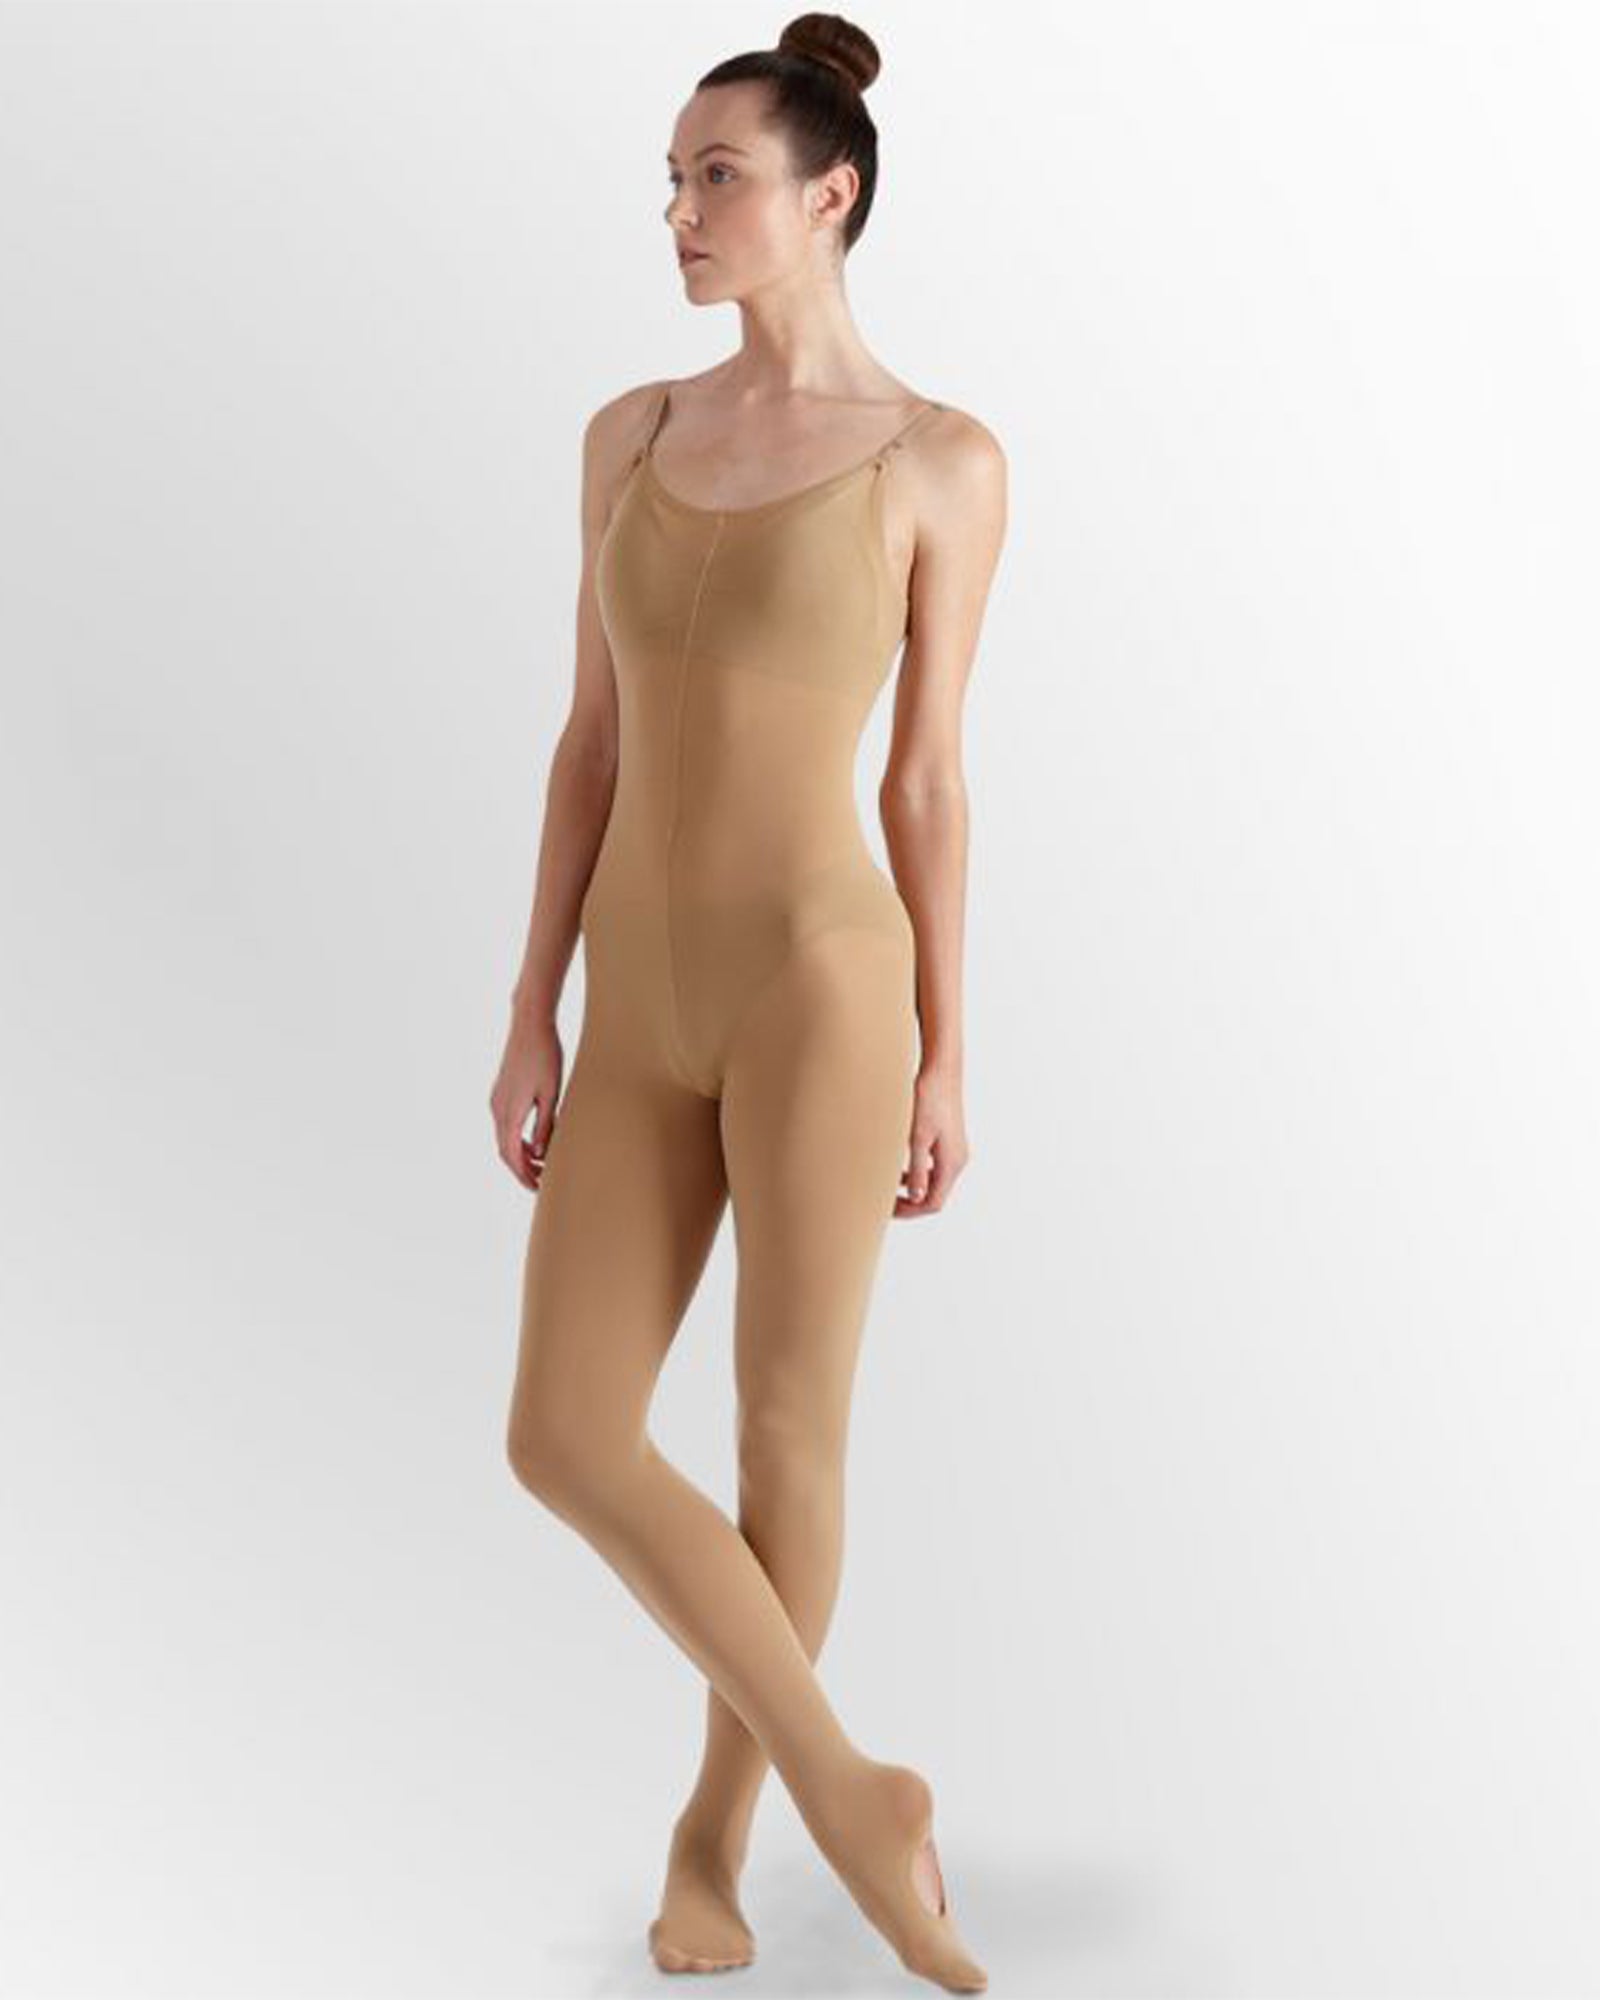 Bloch Footless Tights – And All That Jazz